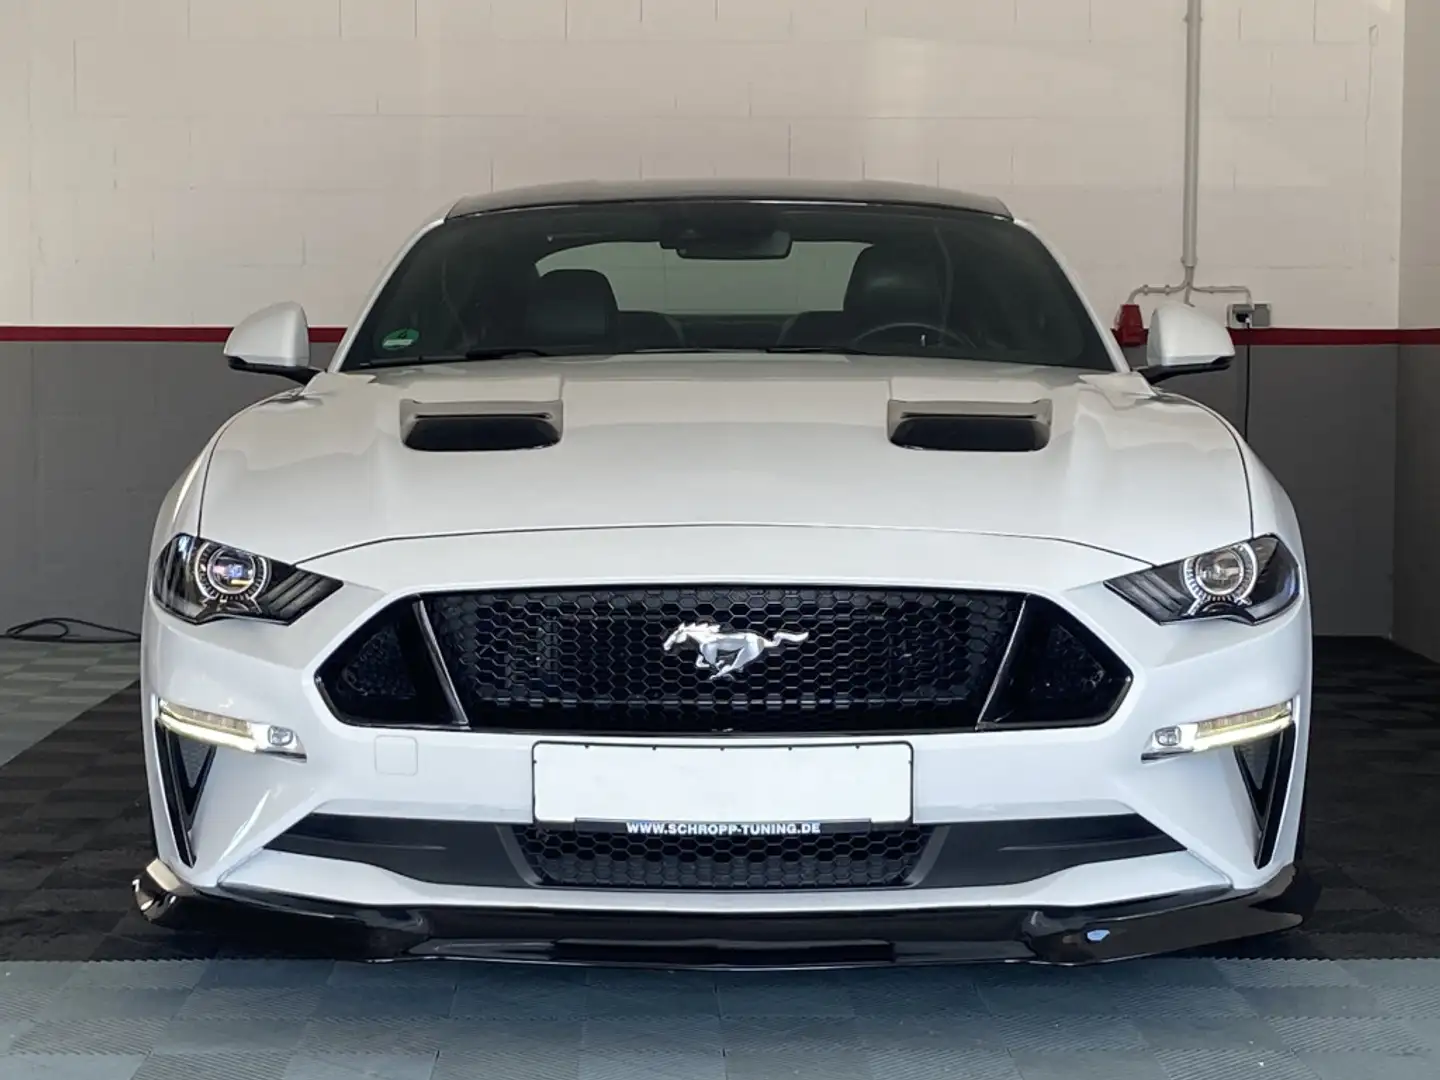 Ford Mustang GT 5.0 ABBES Schropp Supercharger SF700 White - 2